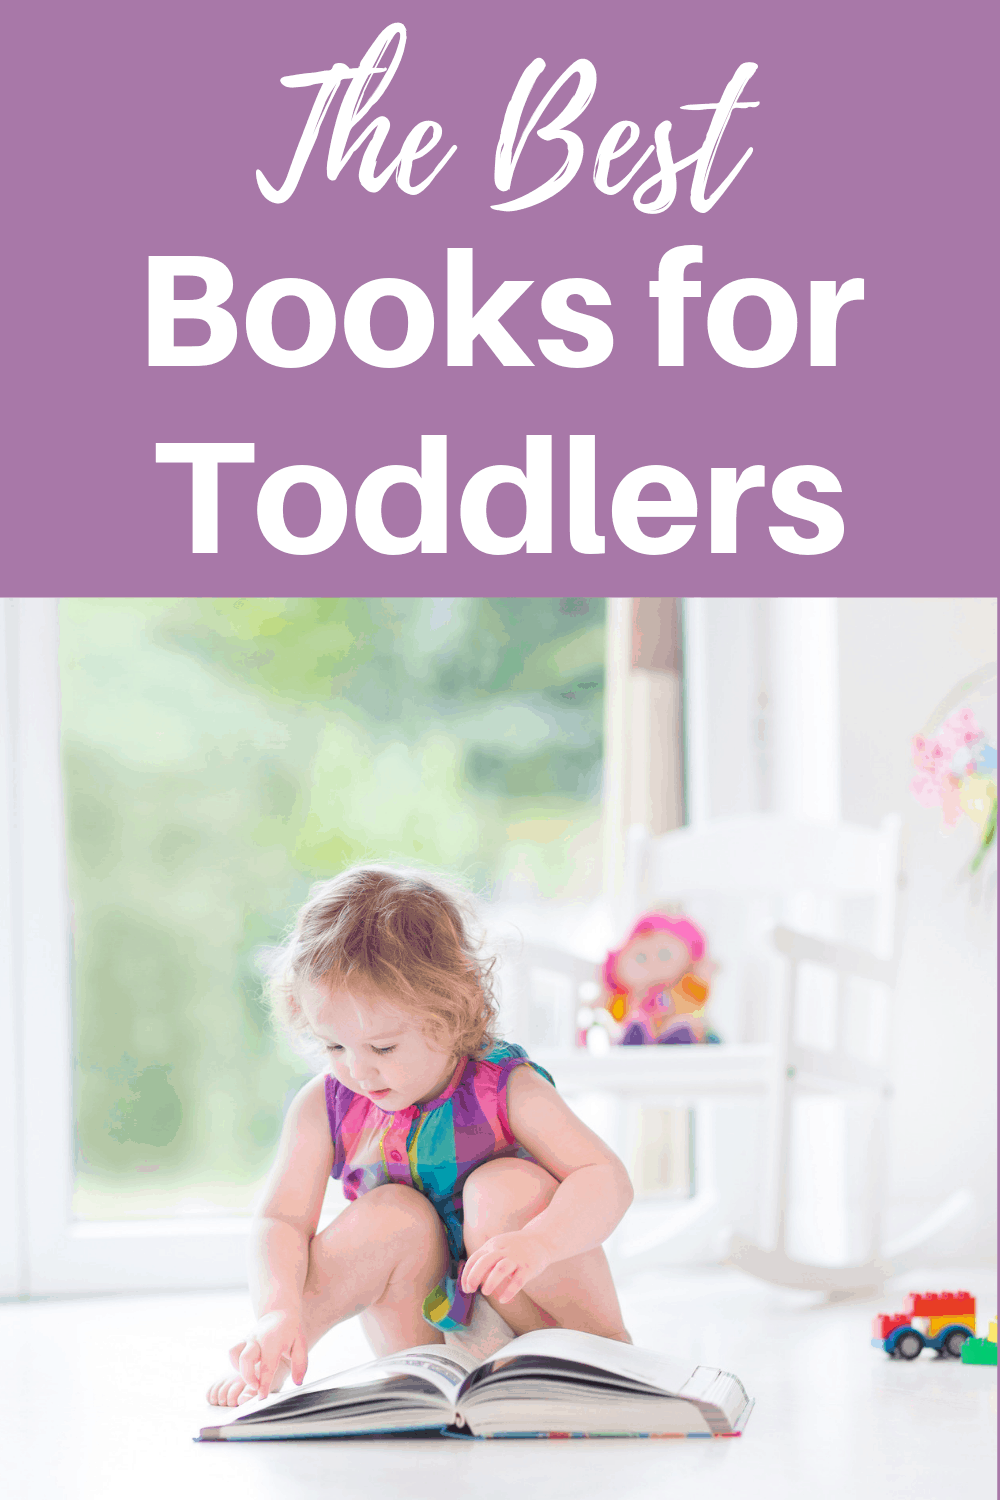 The best books for toddlers